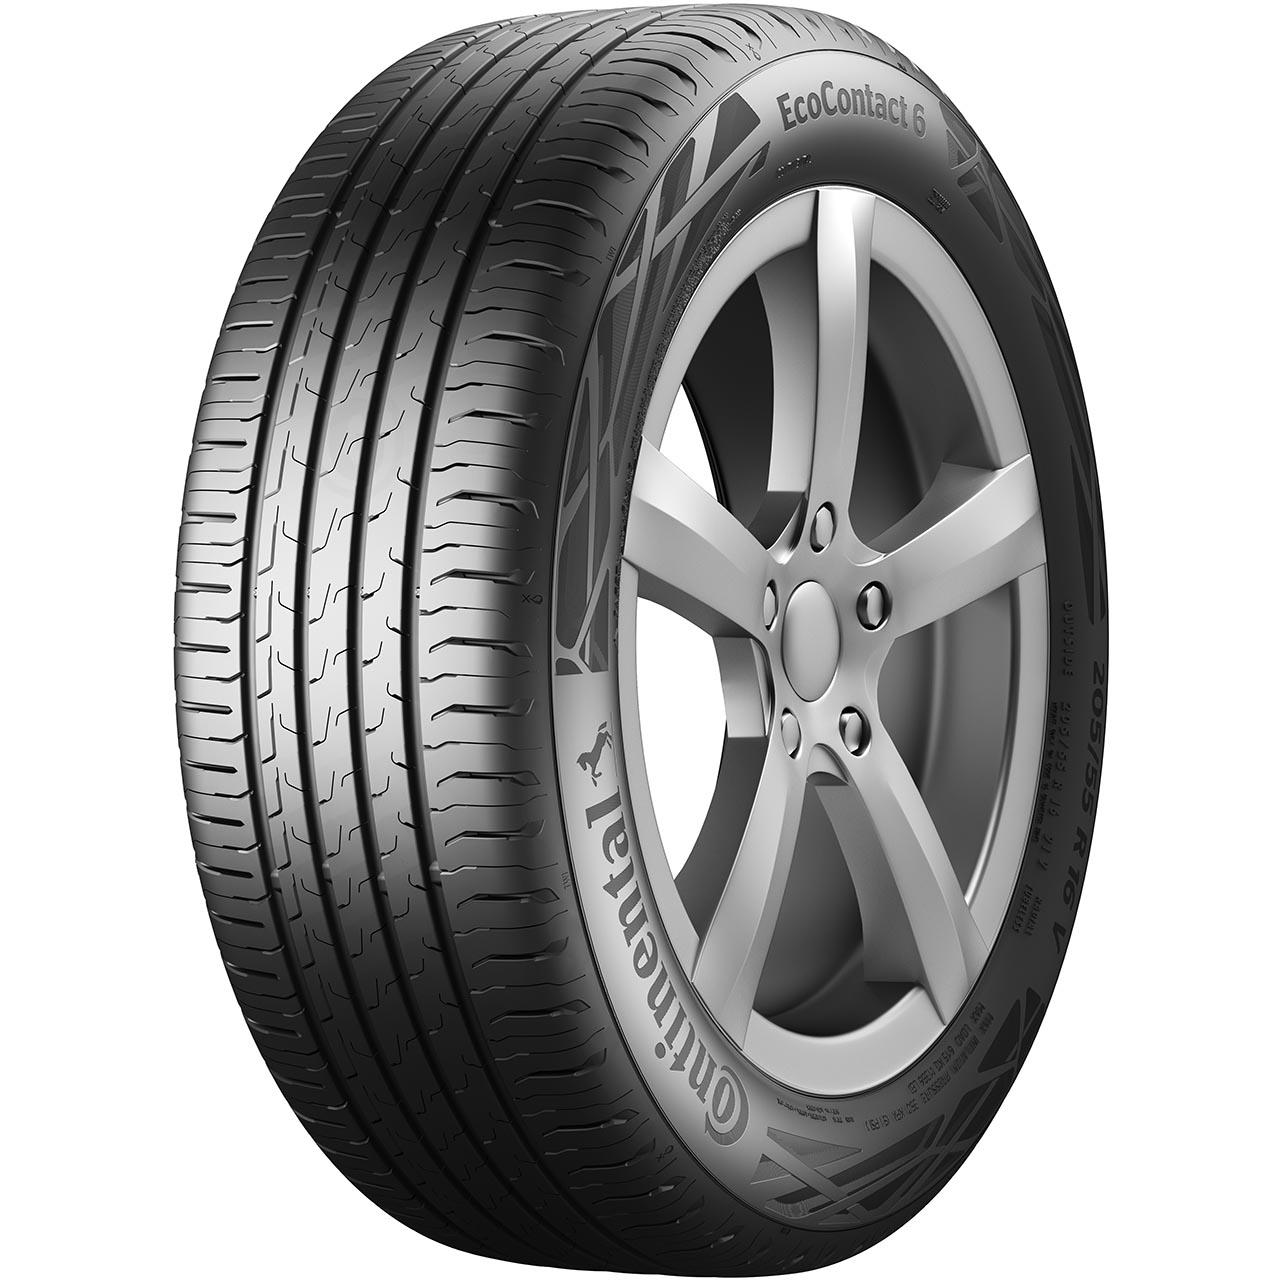 Continental ECOCONTACT 6 205/50R19 94H XL